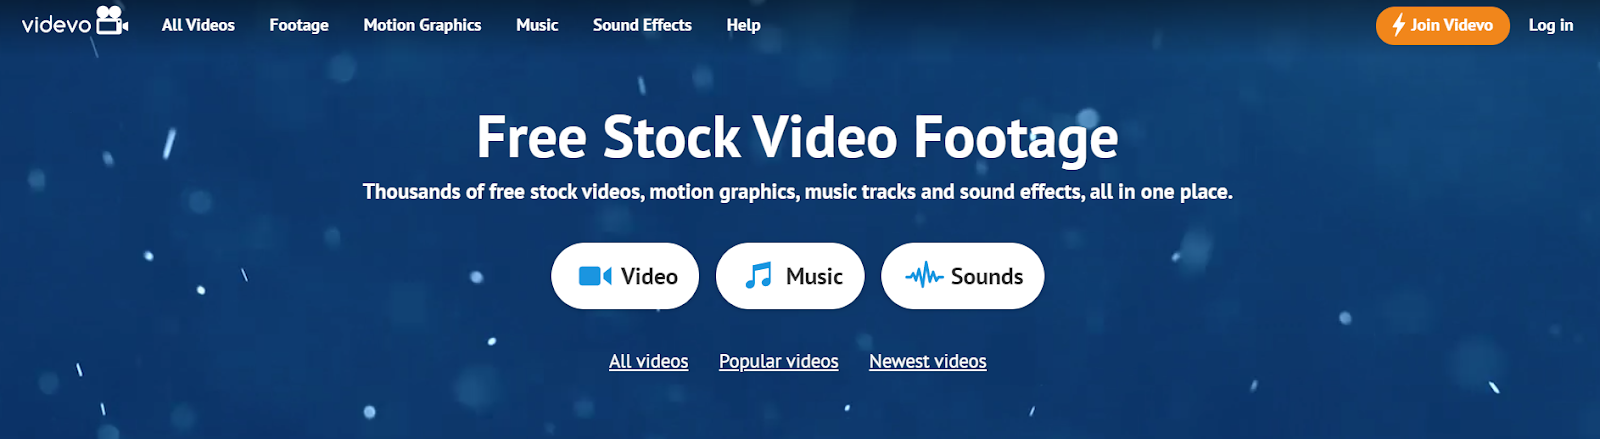 videvo is for best for stock footage